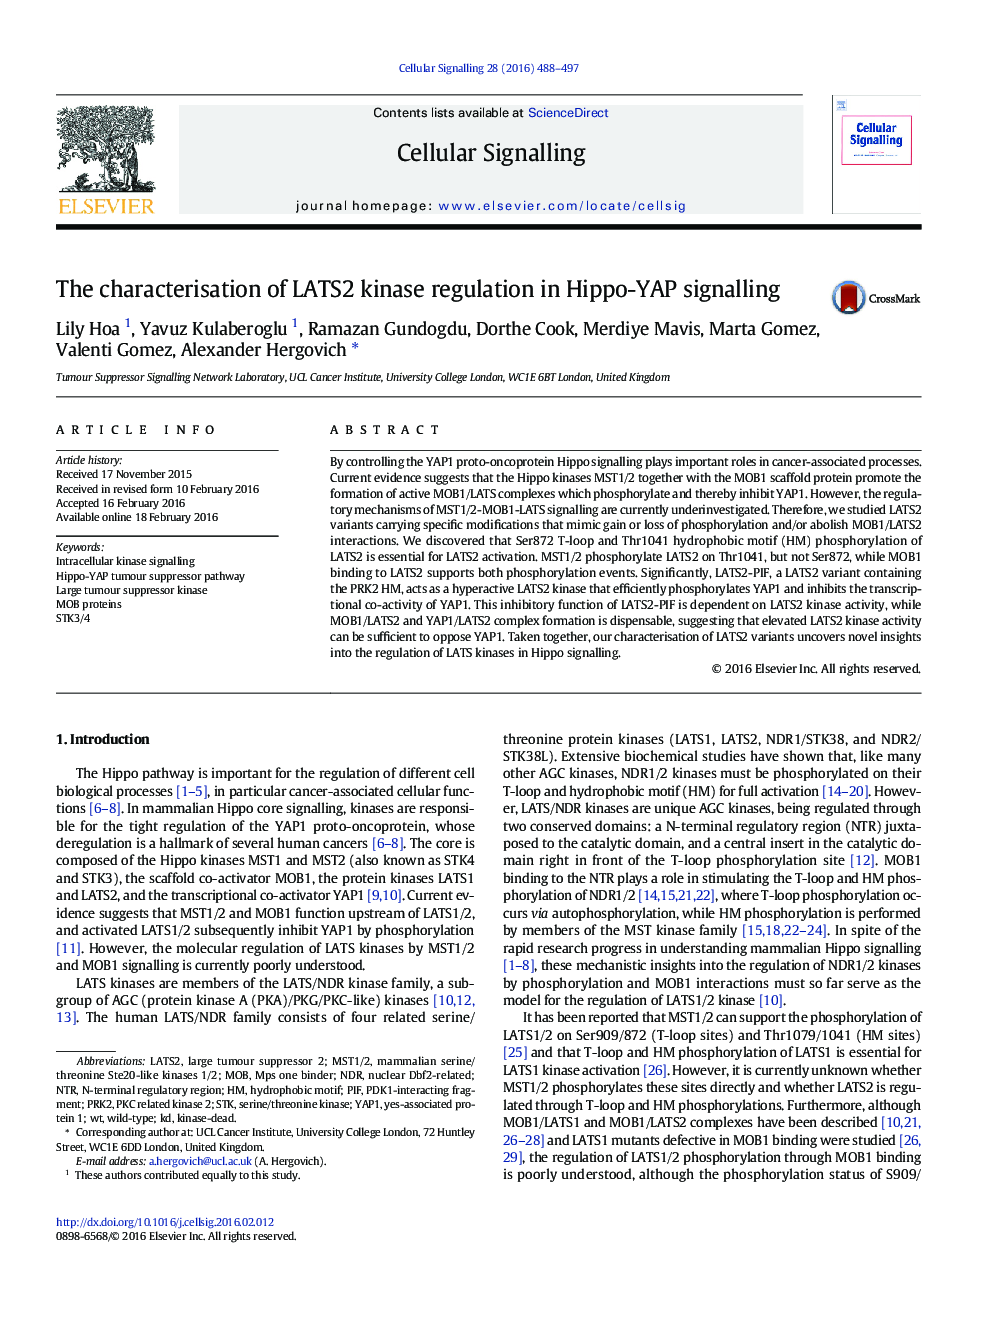 The characterisation of LATS2 kinase regulation in Hippo-YAP signalling